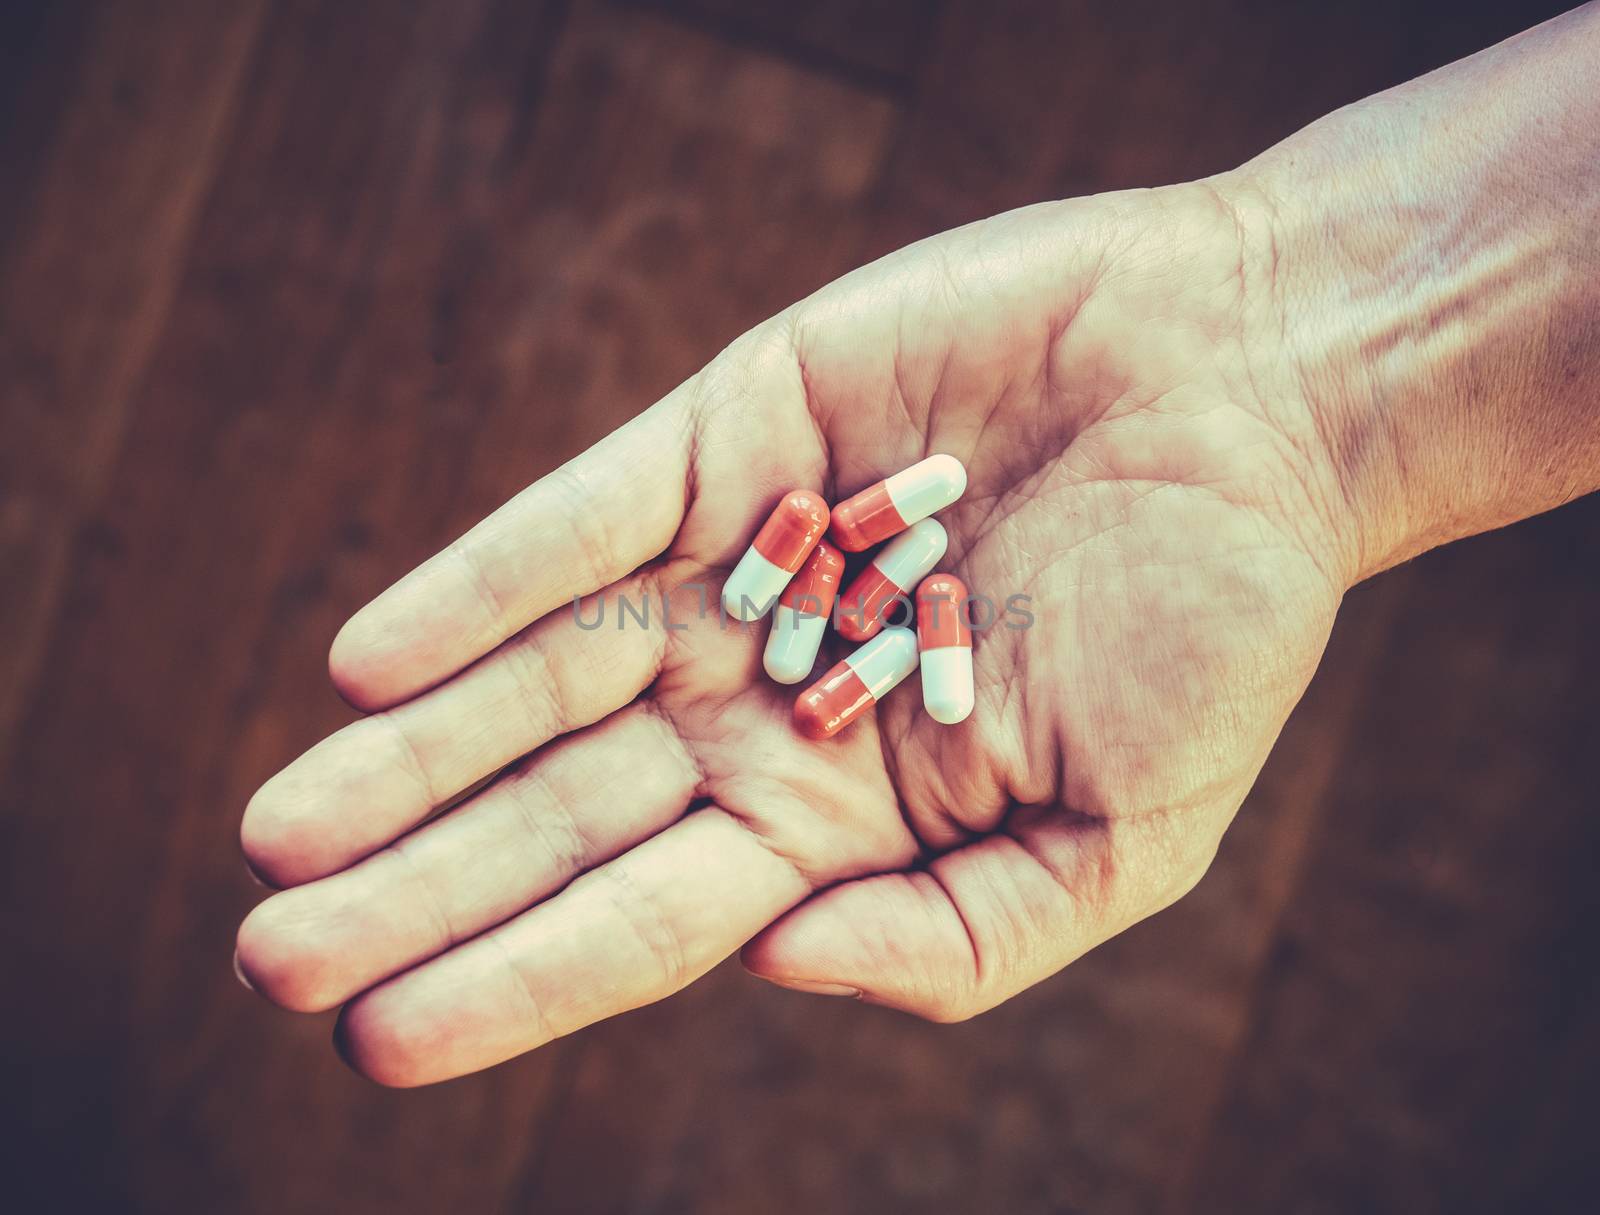 Retro Style Healthcare Image Of Pills Or Tablets Or Capsules In A Person's Hand